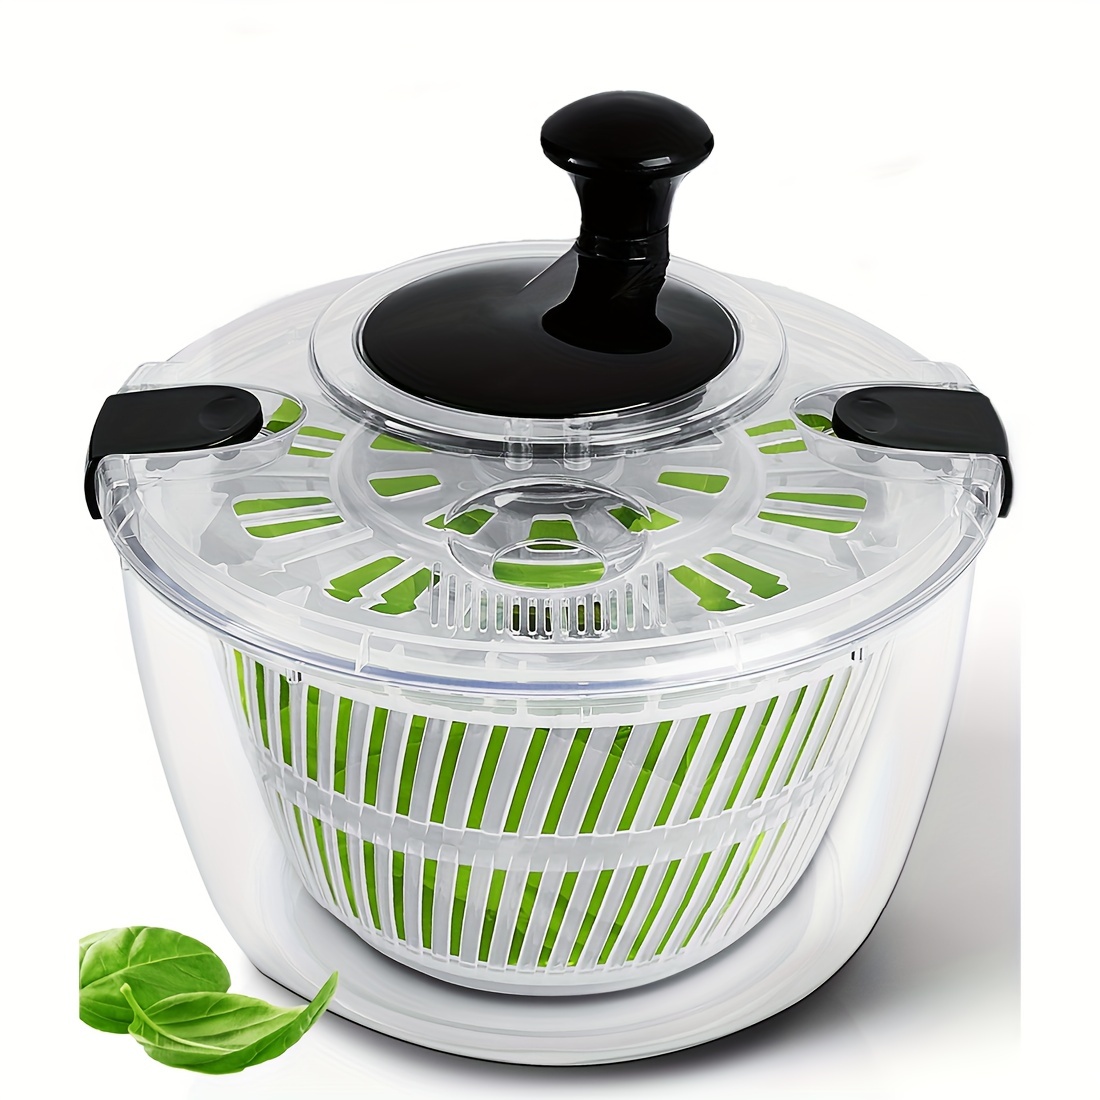 Large Pump Salad Spinner With Drain, Bowl, And Colander - Pump Multi-Use Lettuce  Spinner, Vegetable Dryer, Fruit Washer, Pasta And Fries Spinner - Yahoo  Shopping